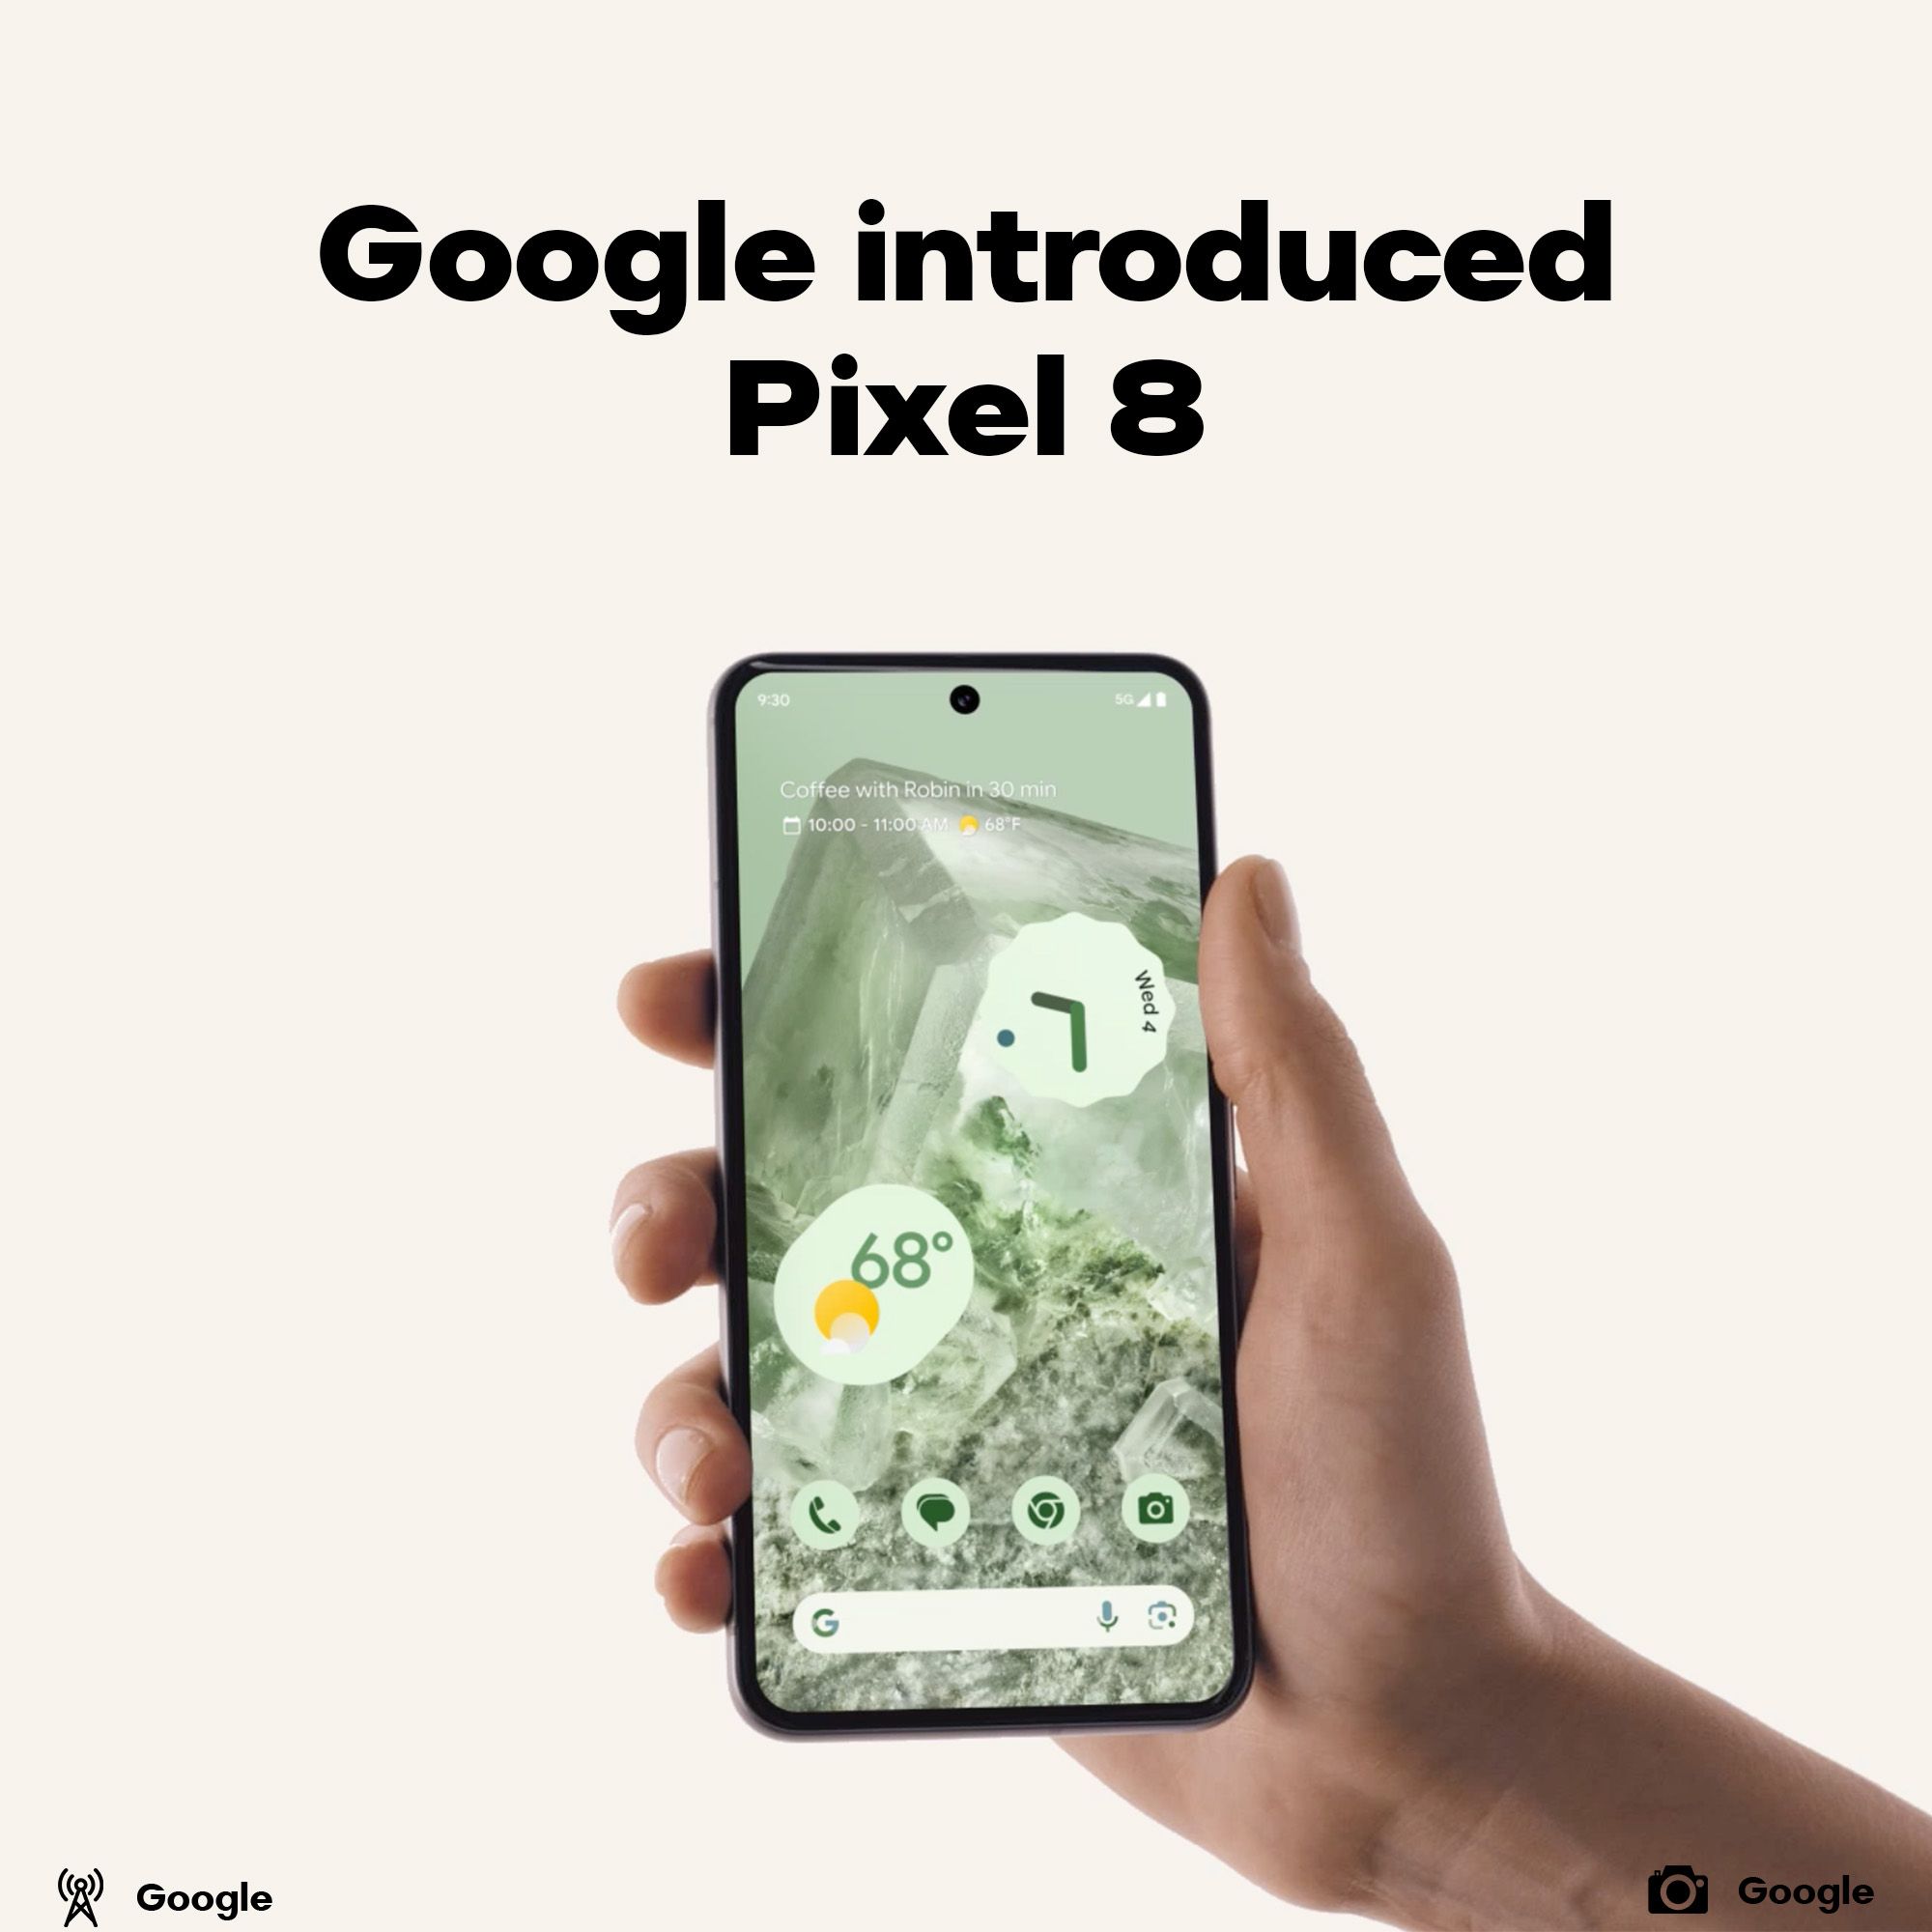 Pixel 8 introduced